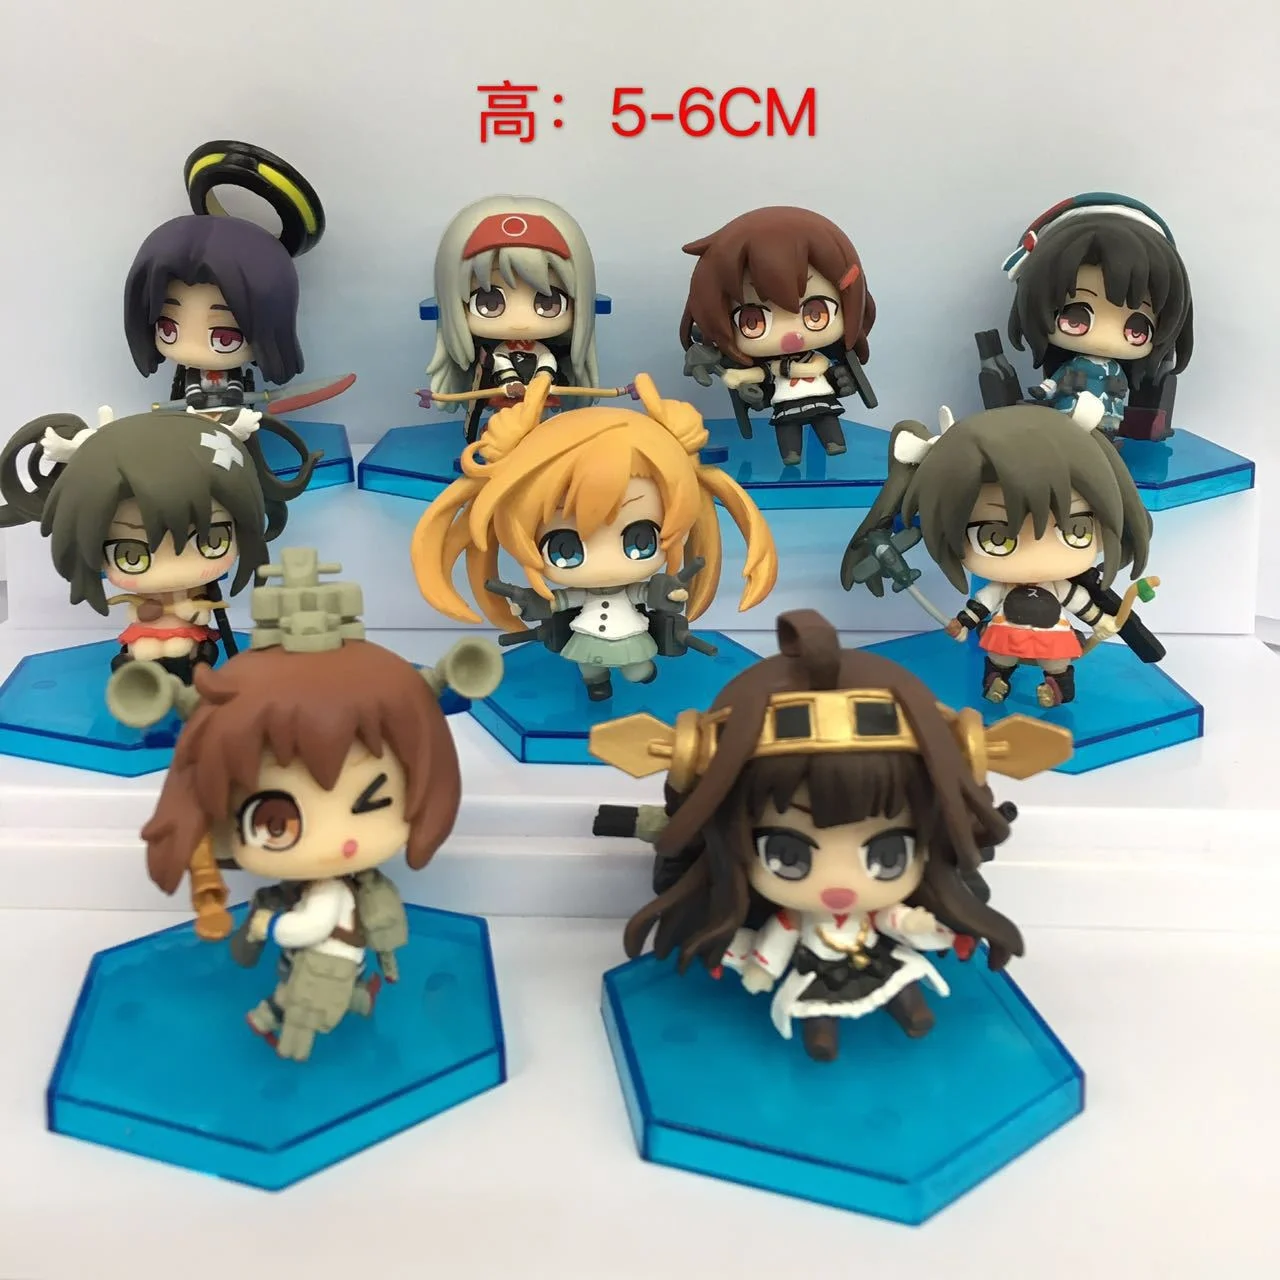 

9pcs/lot Hot-selling 5-6cm pvc Japanese anime figure Kantai Collection Q version action figure collectible model toys brinquedos